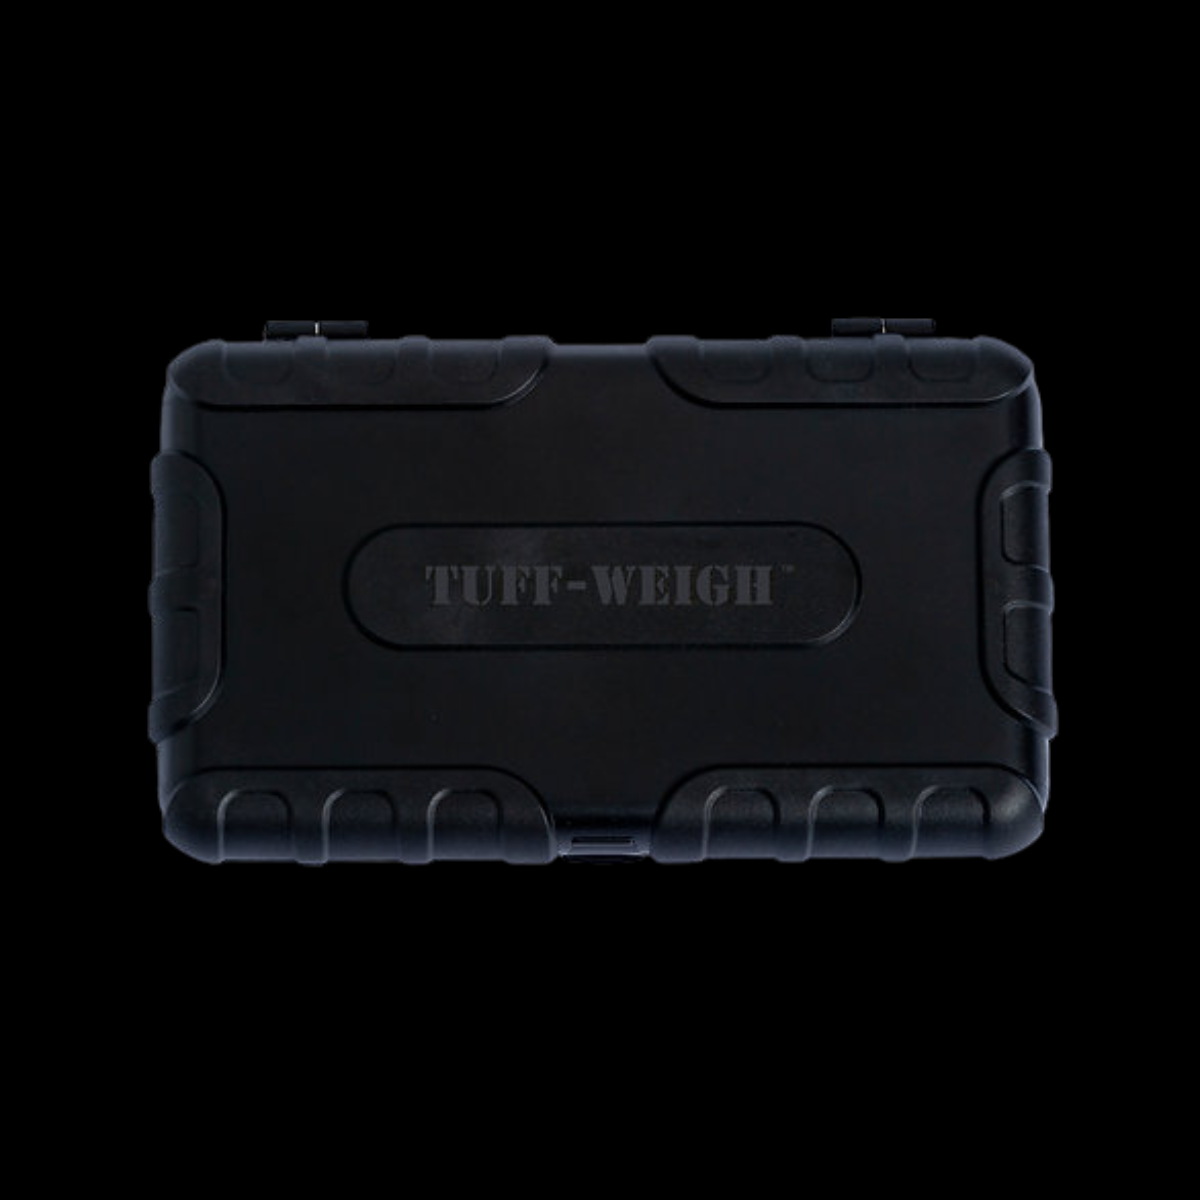 Tuff-Weigh (200g x 0.01g) Impact Resistant Scale with Rubber Grips